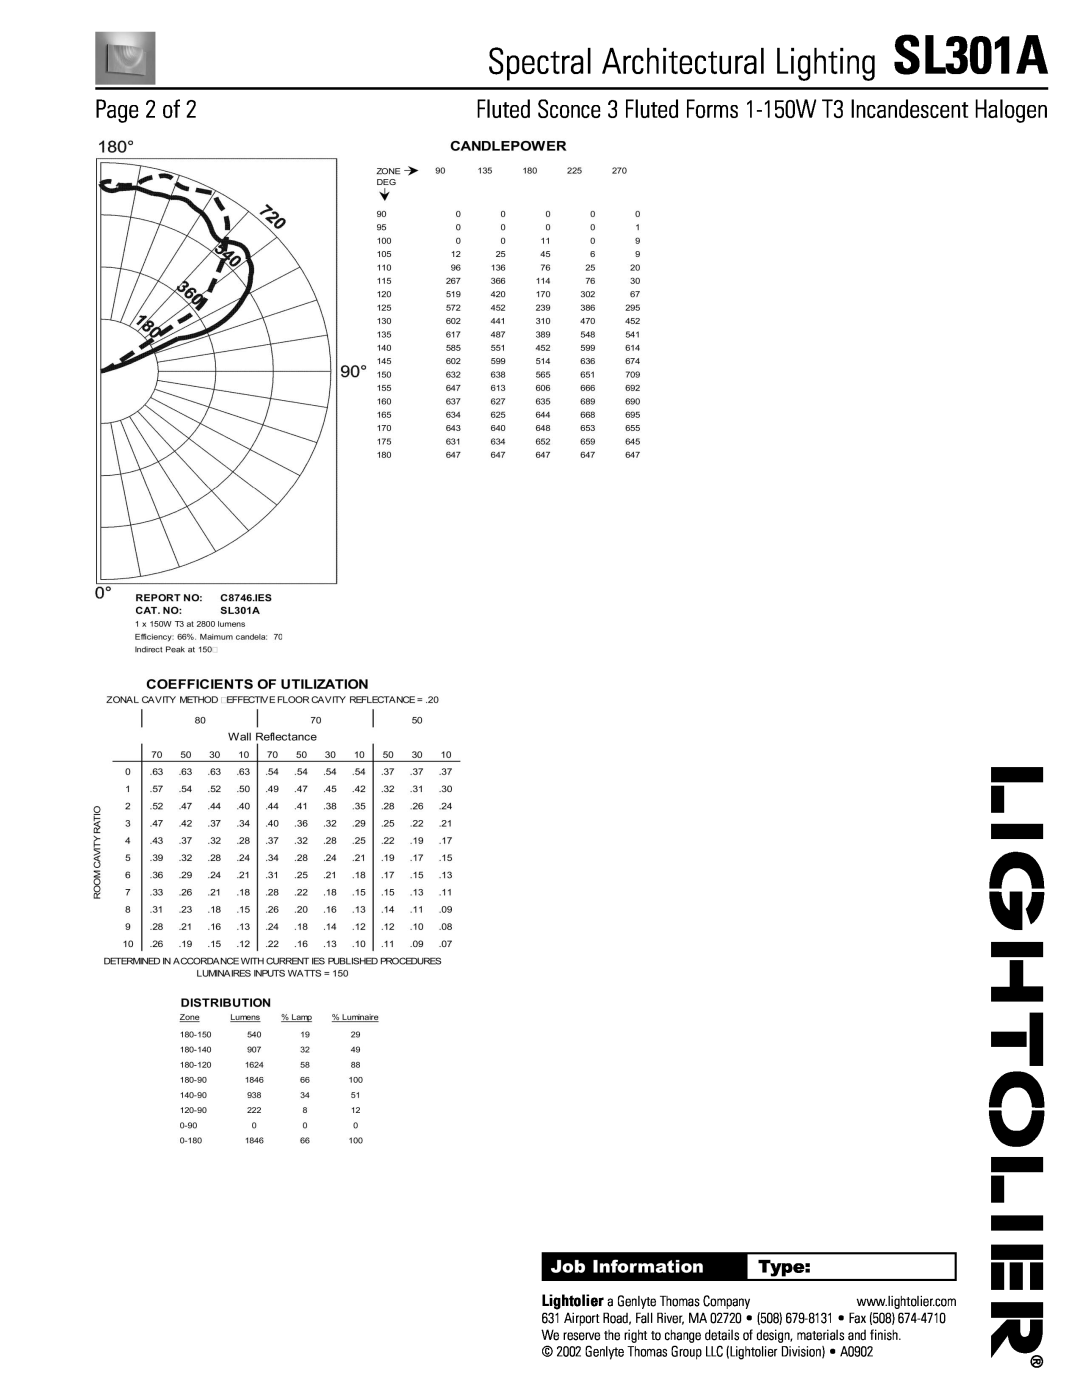 Lightolier manual Page 2 of, Spectral Architectural Lighting SL301A, Job Information, Type 